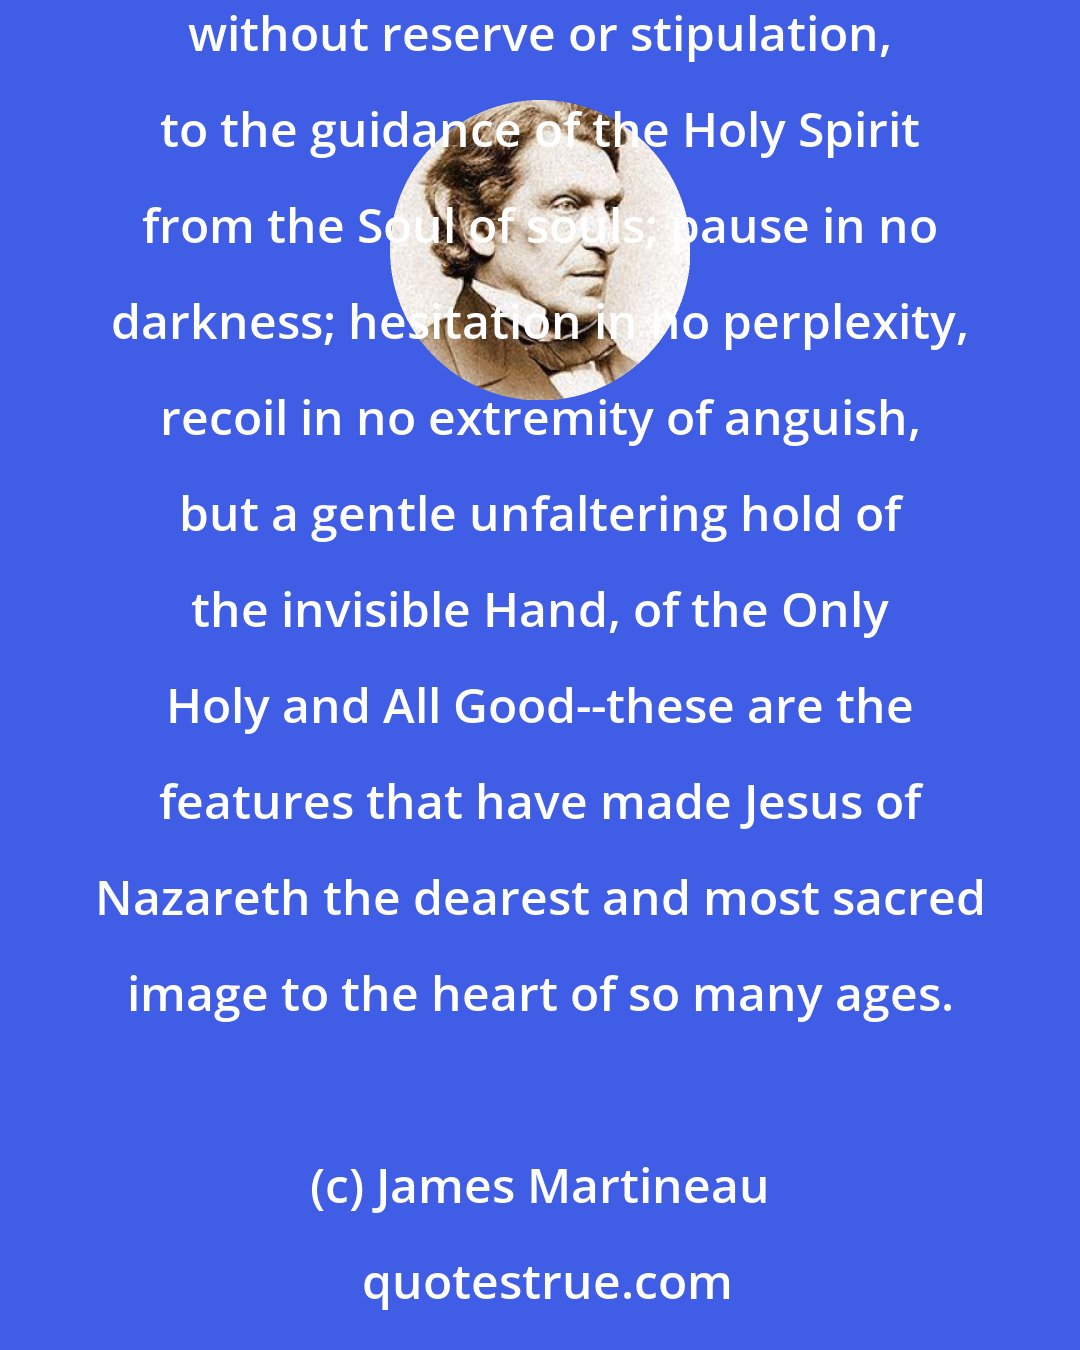 James Martineau: This it is that gives a majesty so pure and touching to the historic figure of Christ; self-abandonment to God, uttermost surrender, without reserve or stipulation, to the guidance of the Holy Spirit from the Soul of souls; pause in no darkness; hesitation in no perplexity, recoil in no extremity of anguish, but a gentle unfaltering hold of the invisible Hand, of the Only Holy and All Good--these are the features that have made Jesus of Nazareth the dearest and most sacred image to the heart of so many ages.